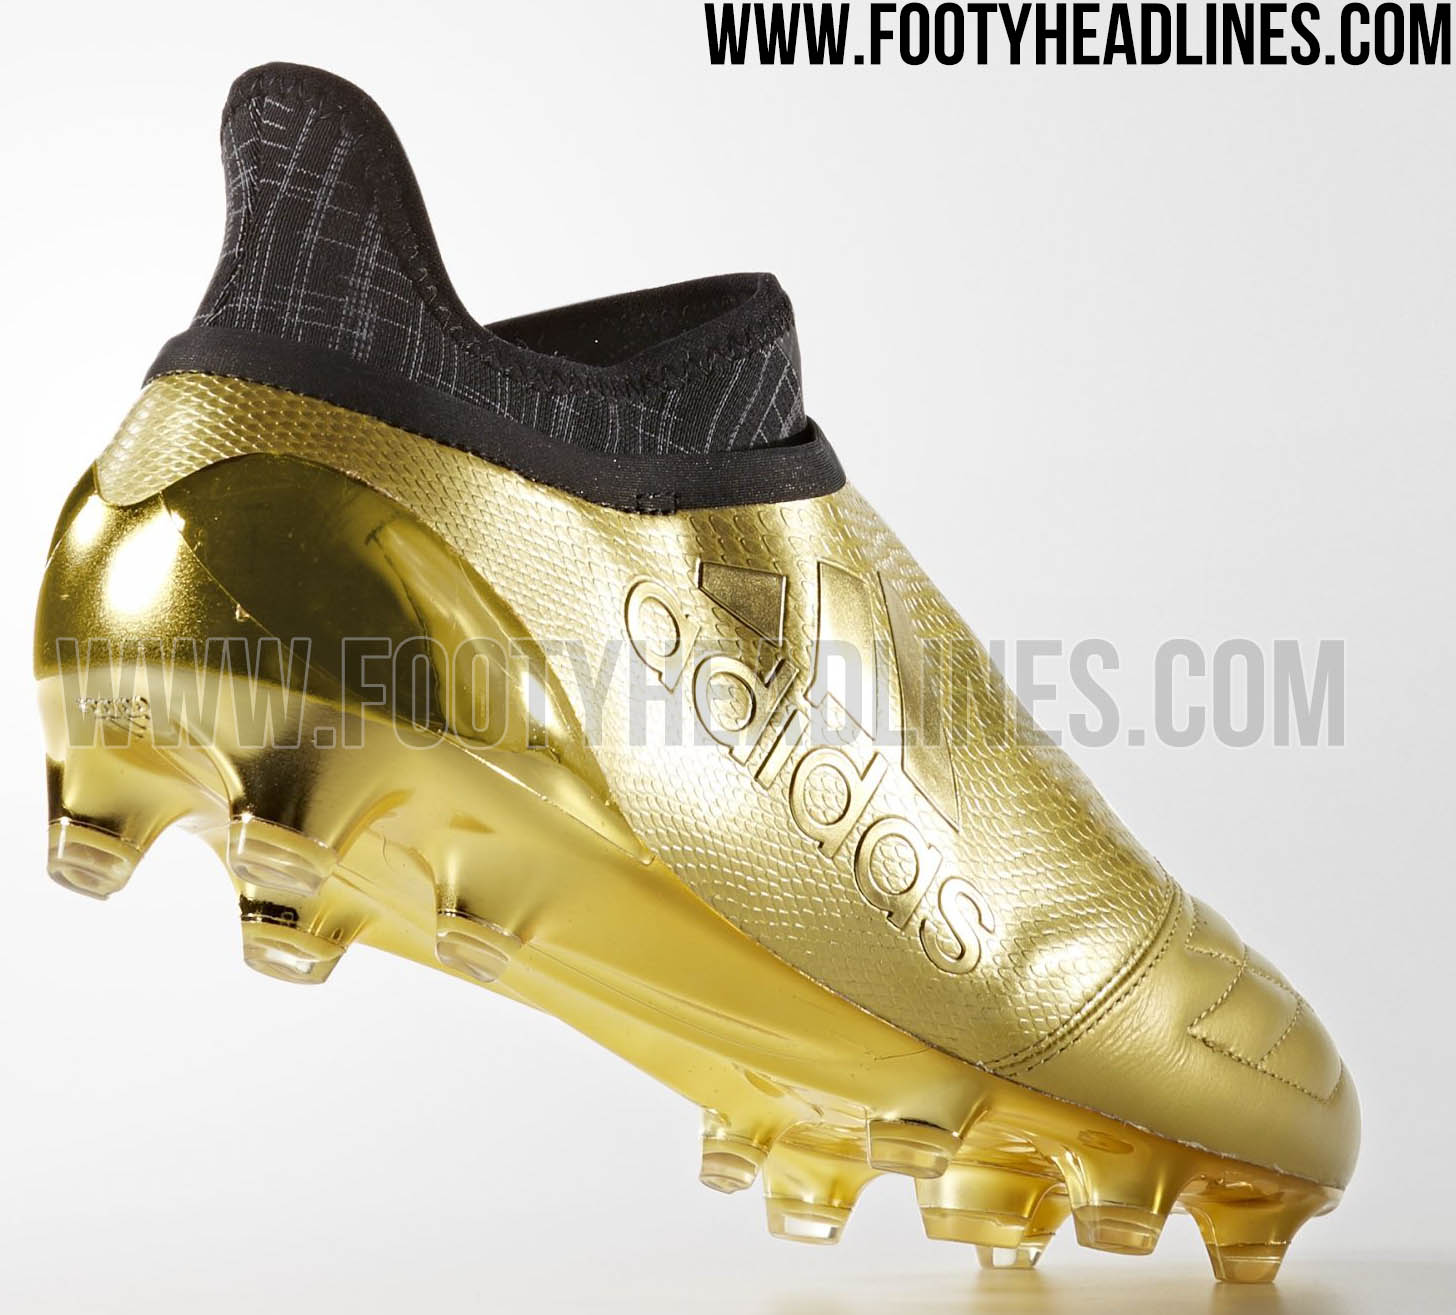 Gold Adidas X 16+ PureChaos Space Craft Boots Released Footy Headlines